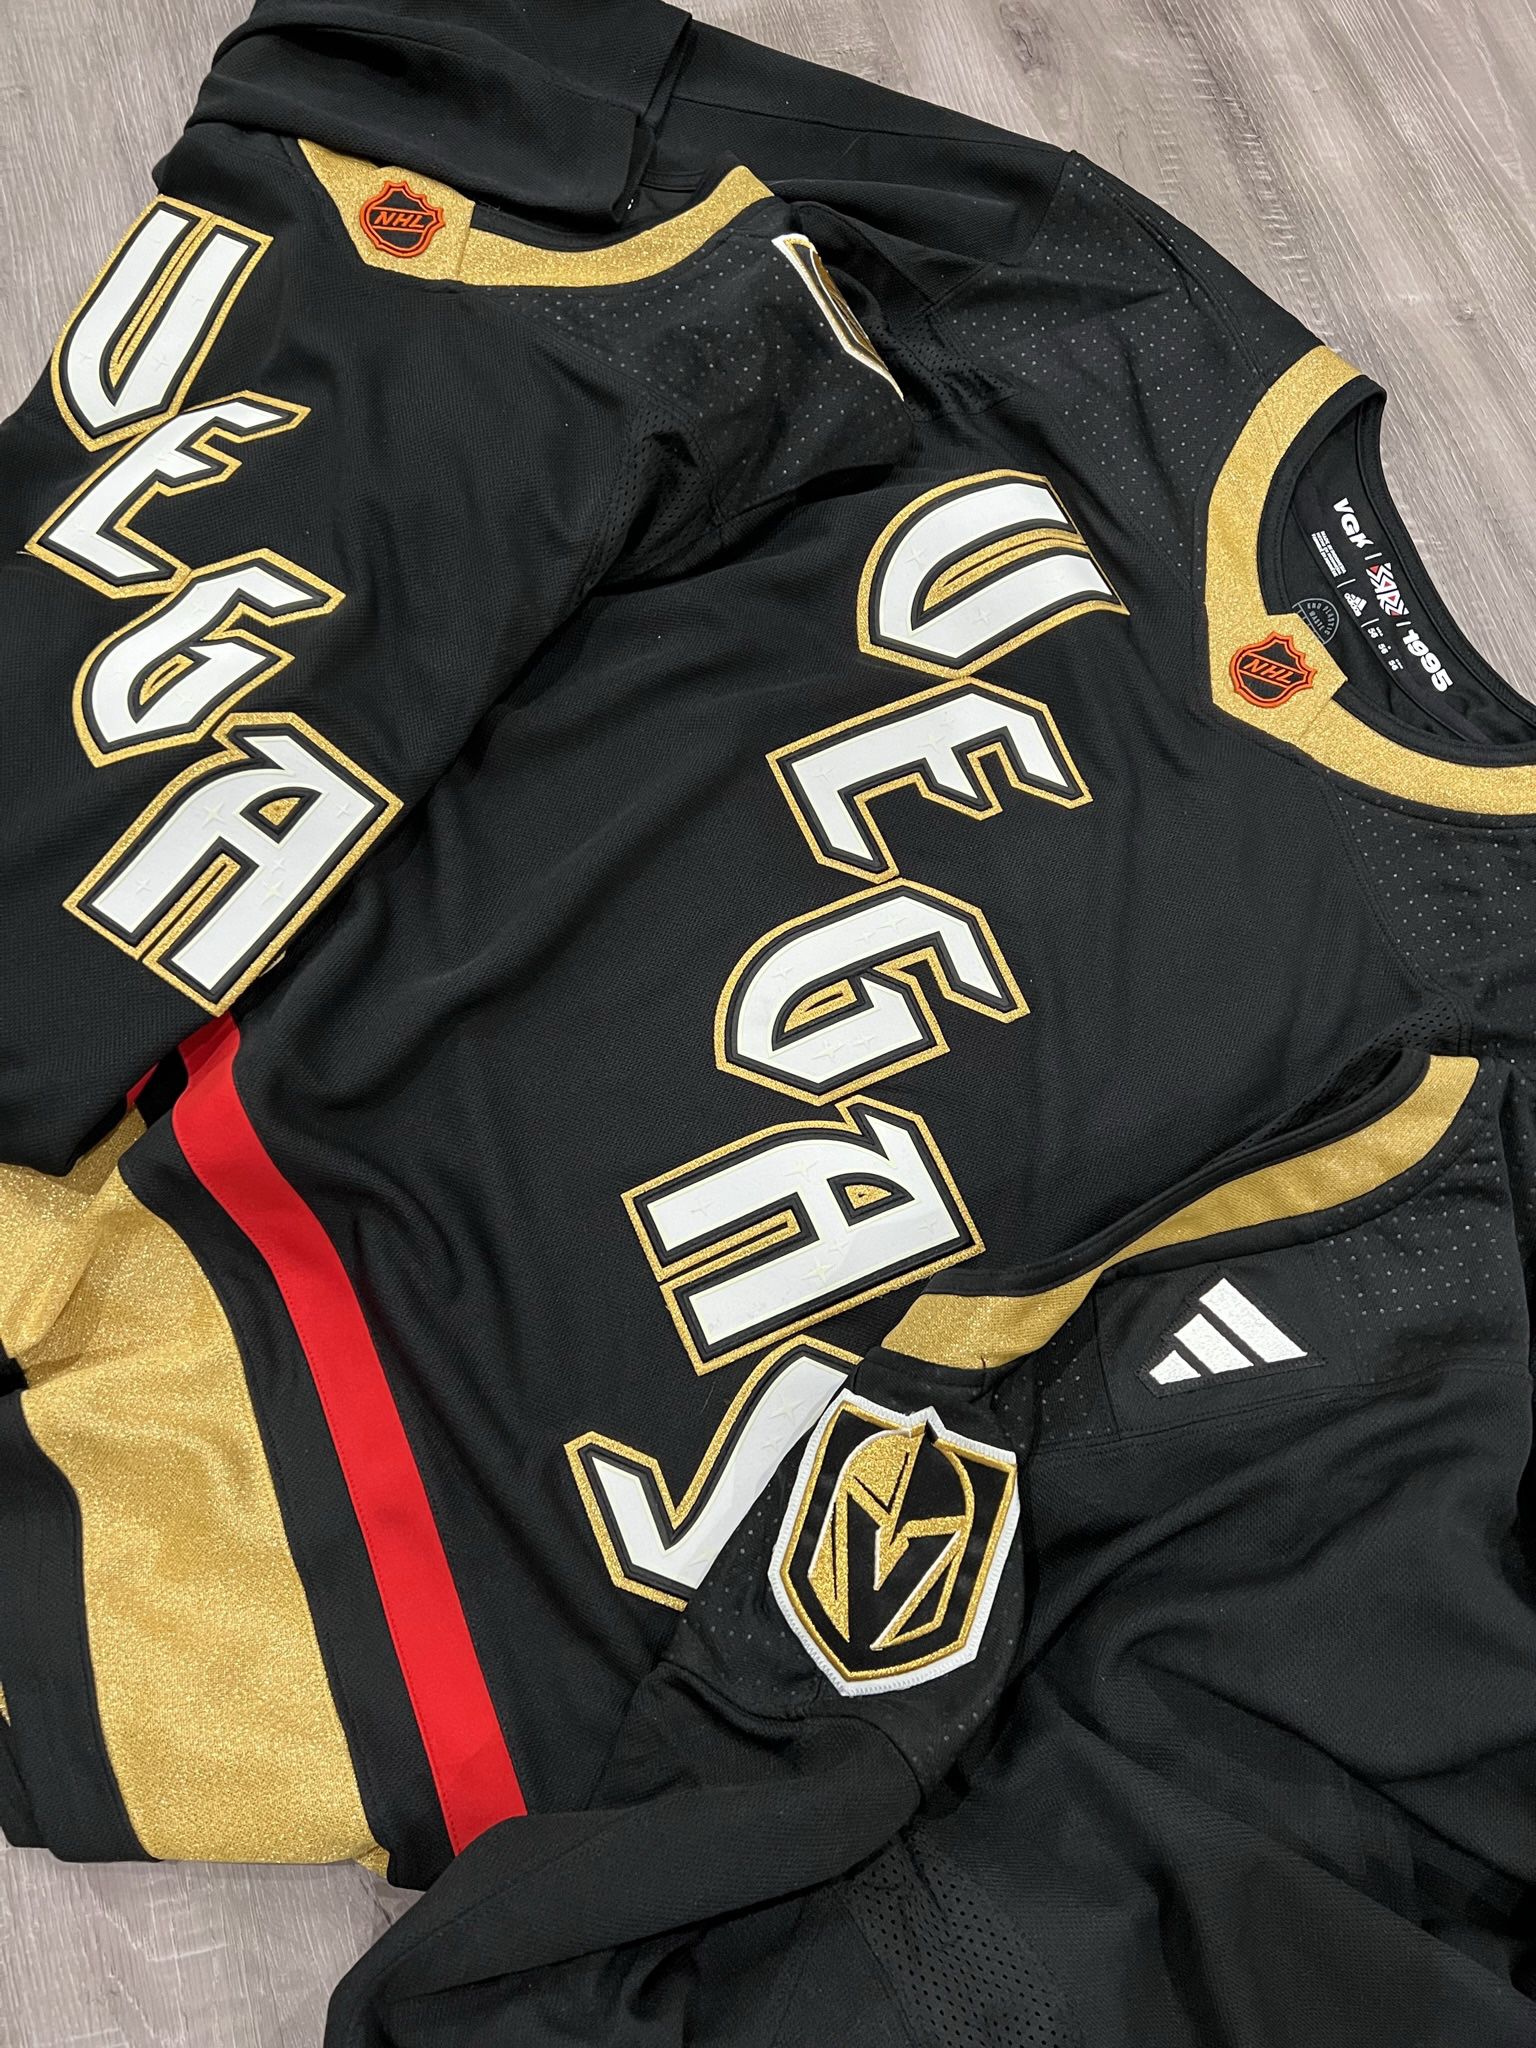 Knights Jersey New for Sale in Las Vegas, NV - OfferUp